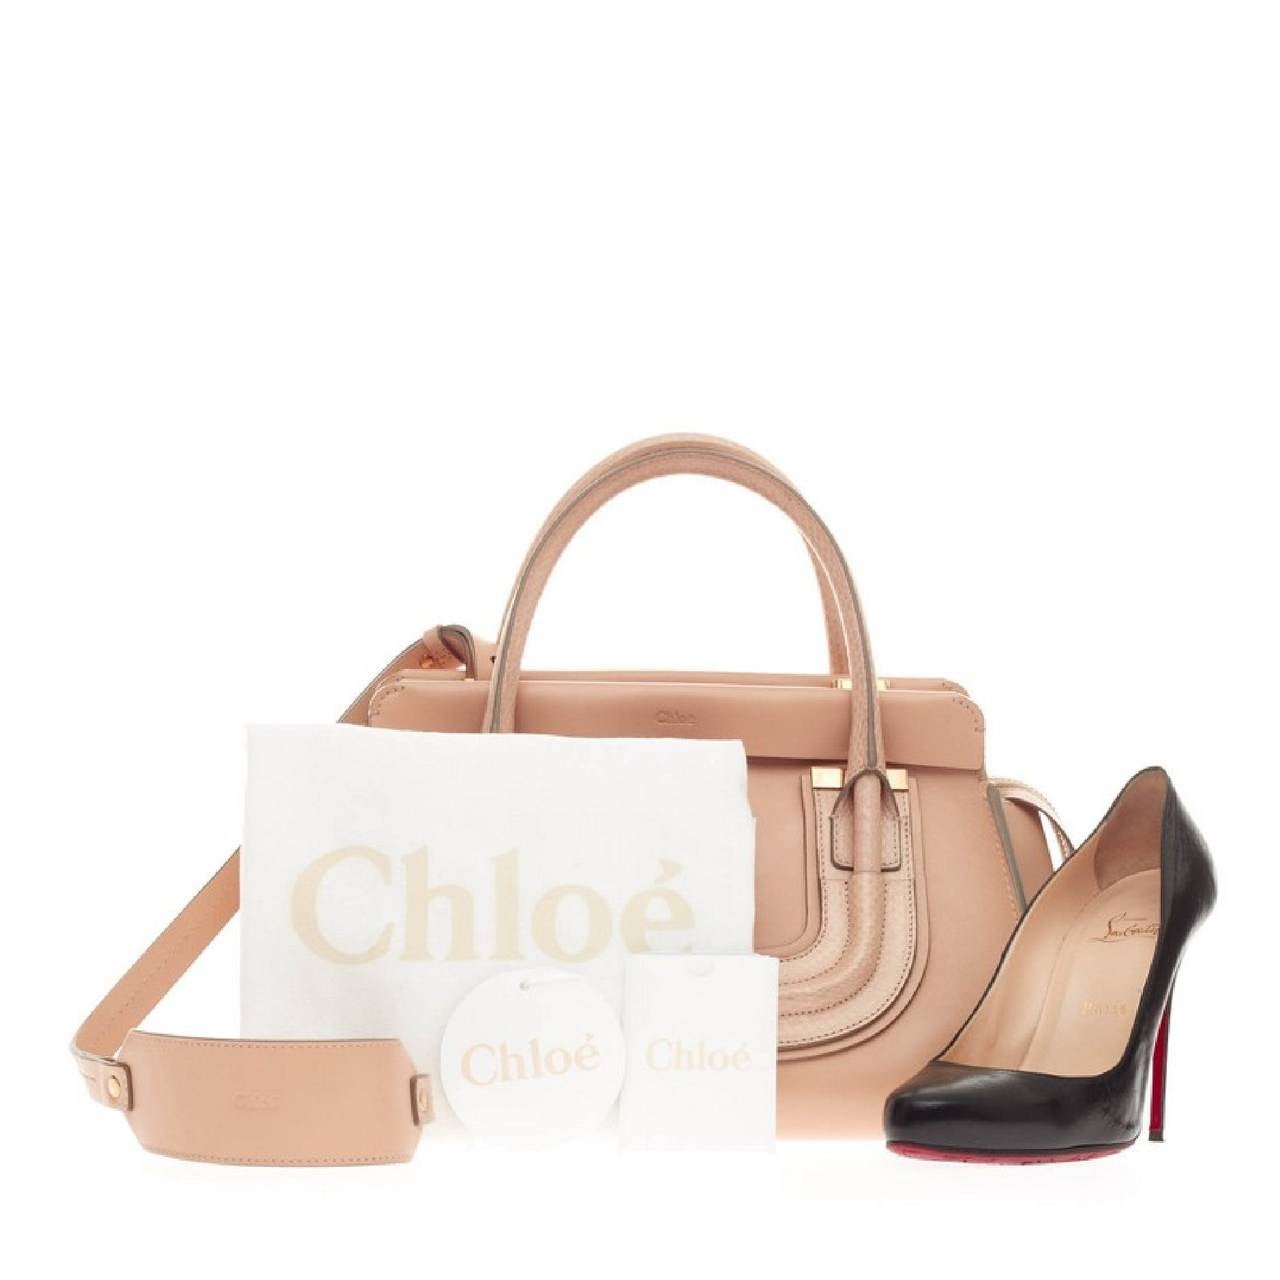 This authentic Chloe Everston Satchel Leather Medium is true to the brand's aesthetic with its sophisticated and chic in design perfect for everyday looks. Crafted in blush nude grained leather with genuine snakeskin detailing, this satchel features